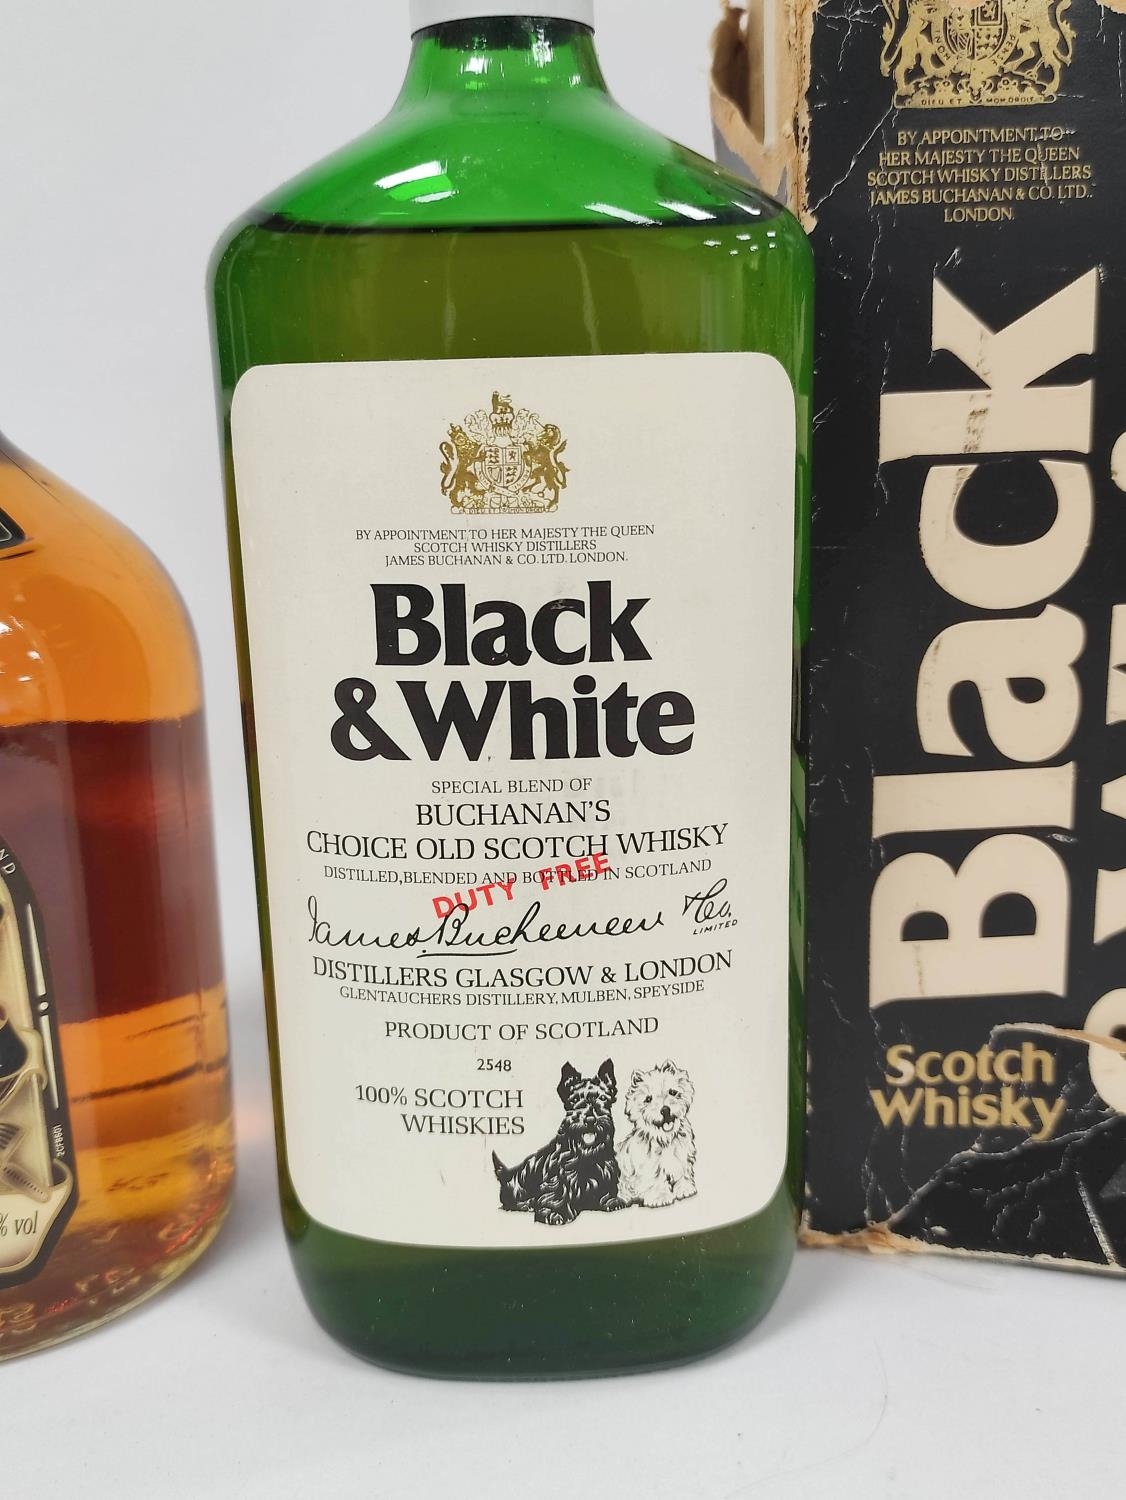 Black & White special blend of Buchanan's choice old Scotch whisky, Duty free square bottle, - Image 2 of 5